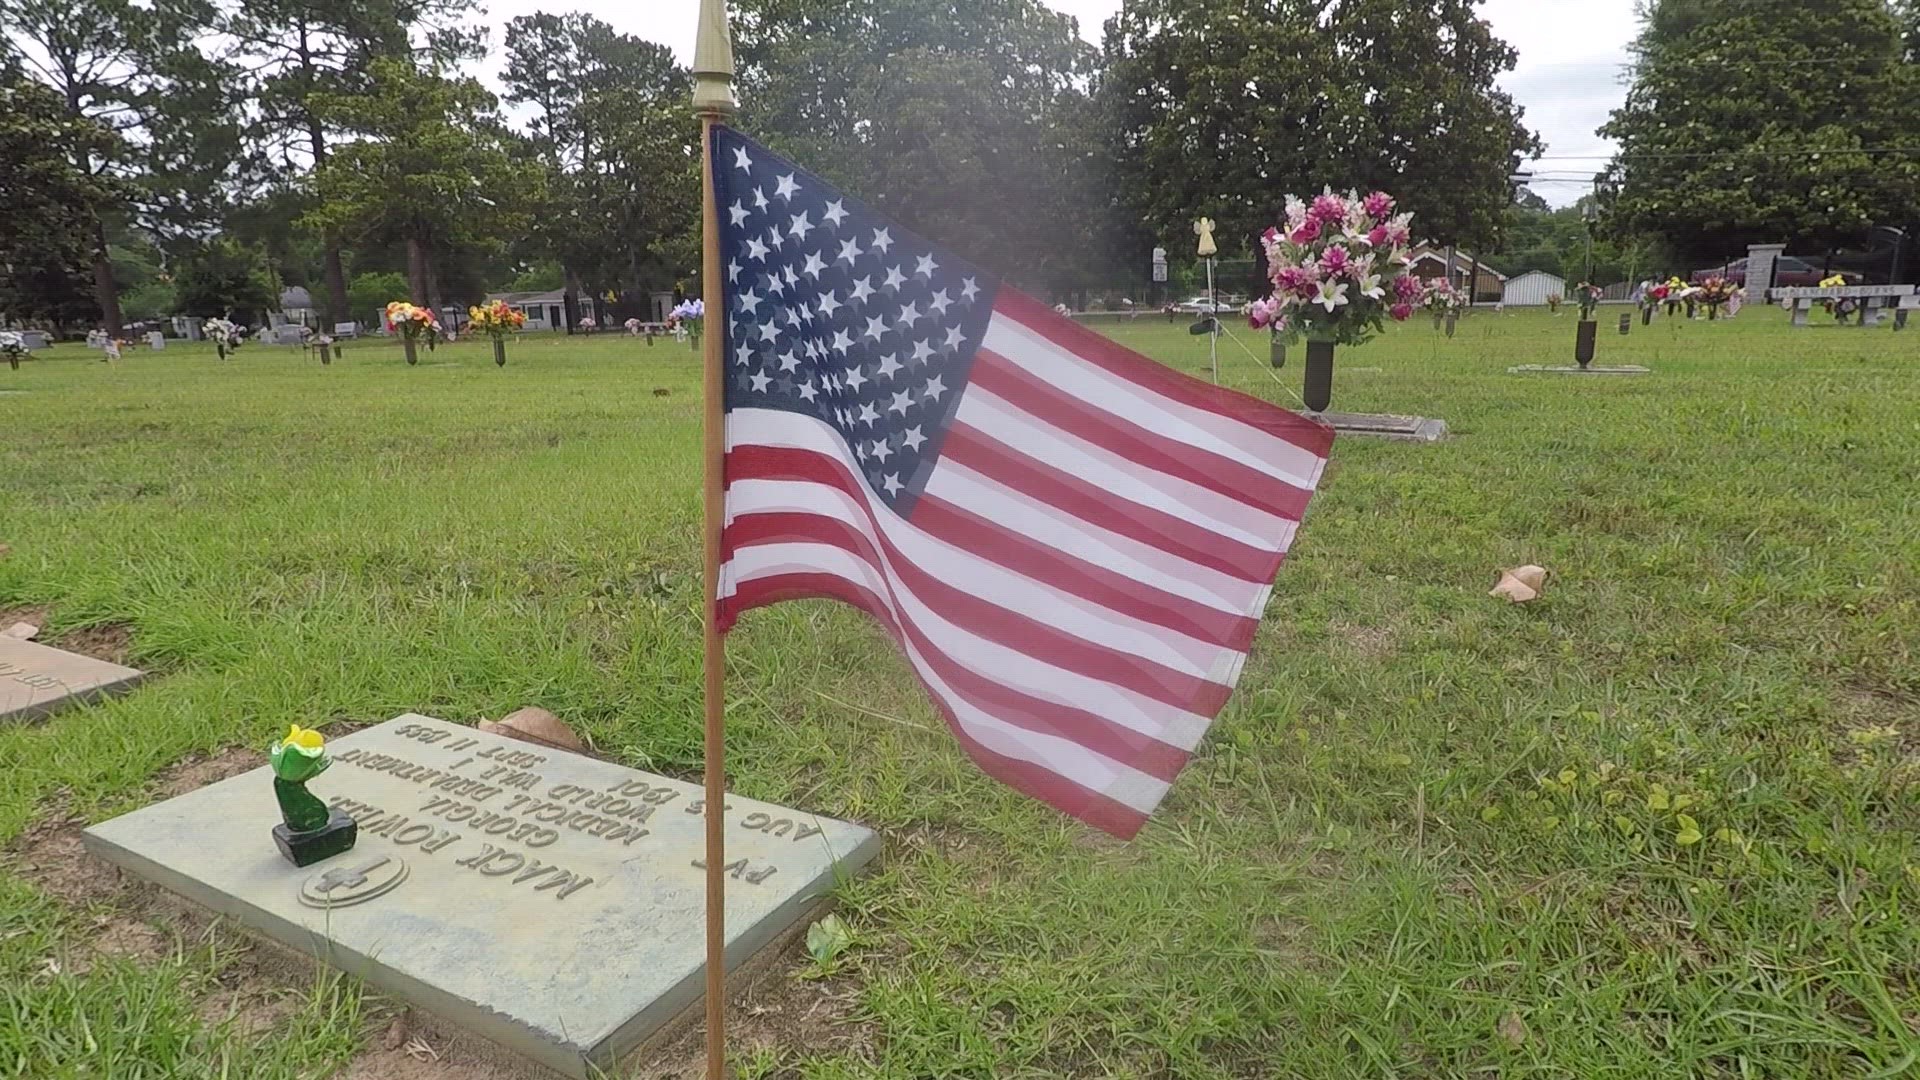 Seven veterans organizations came out to cover over 2,000 graves with flags.